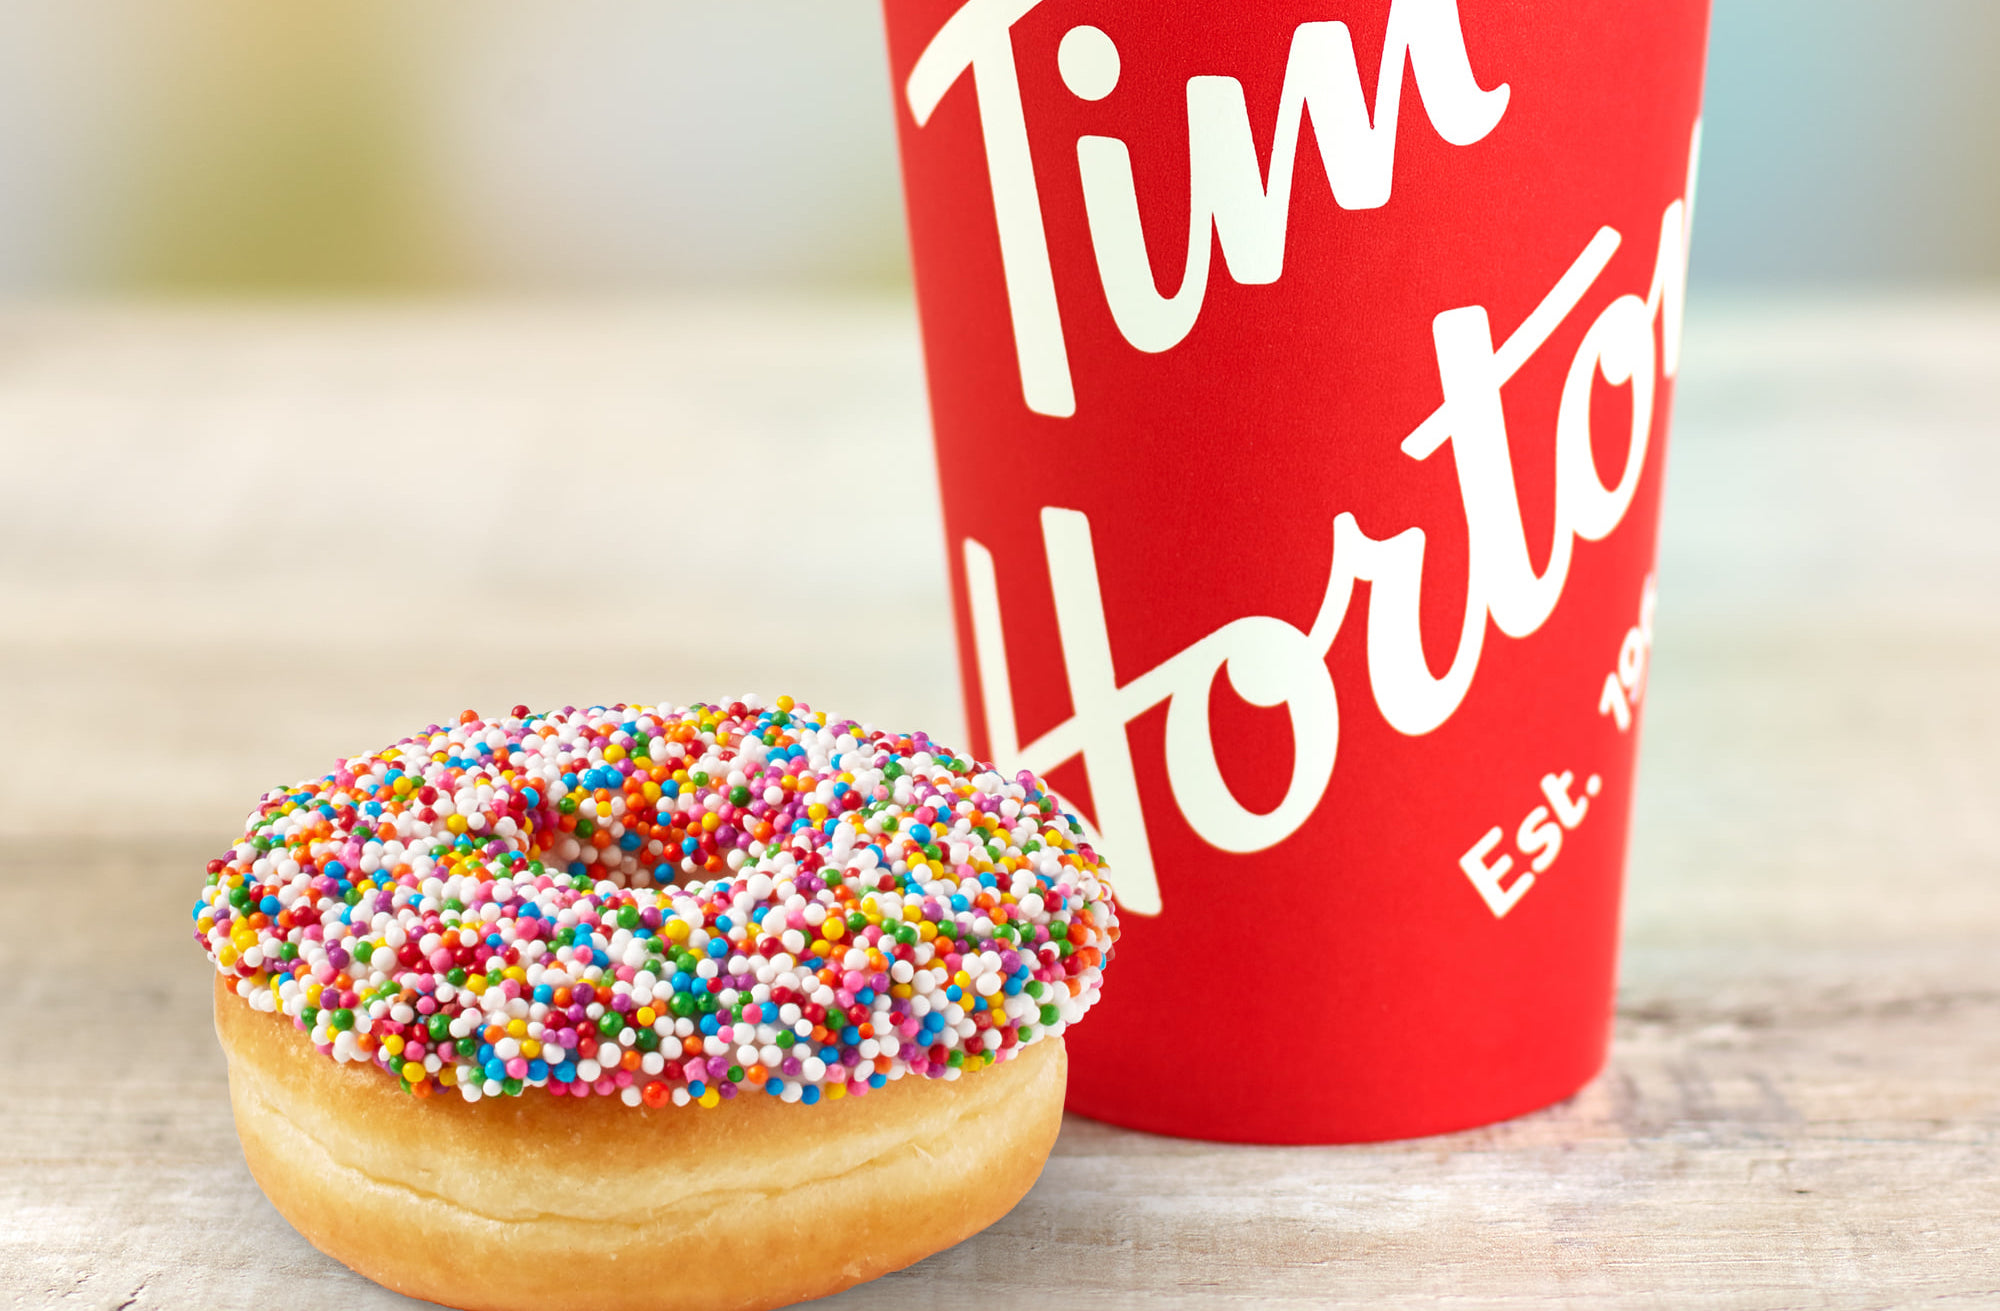 A Tim Hortons coffee and doughnut, the coffee in a red cup and the doughnut topped with sprinkles